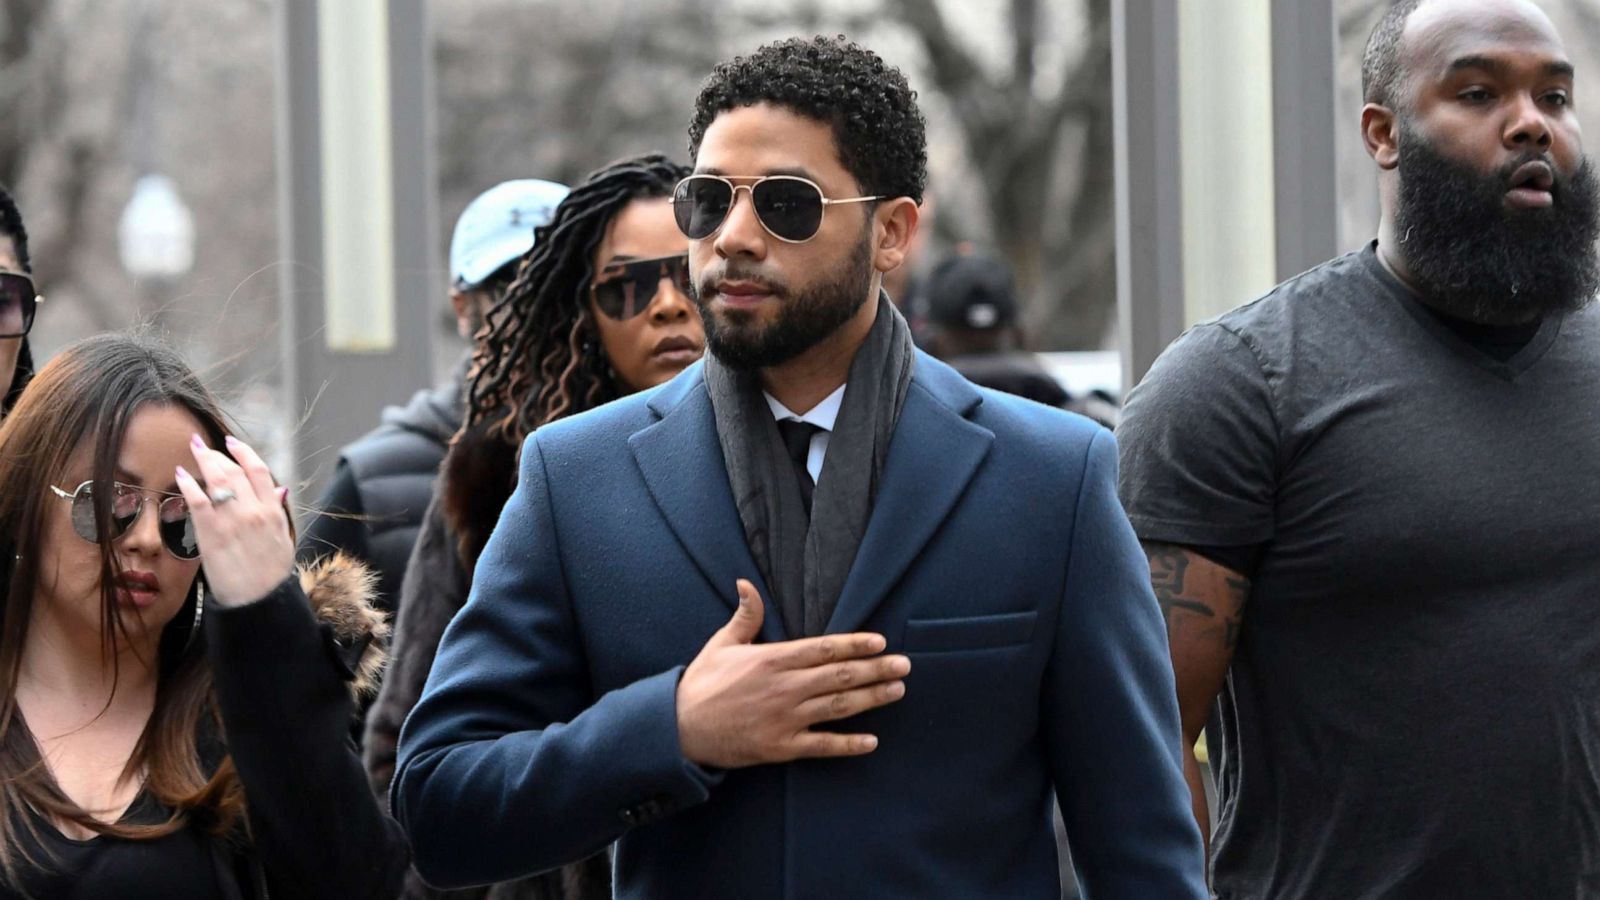 empire to get 1 more season on fox amid schedule shake up abc news no plans for jussie smollett to return to empire amid hate crime fallout